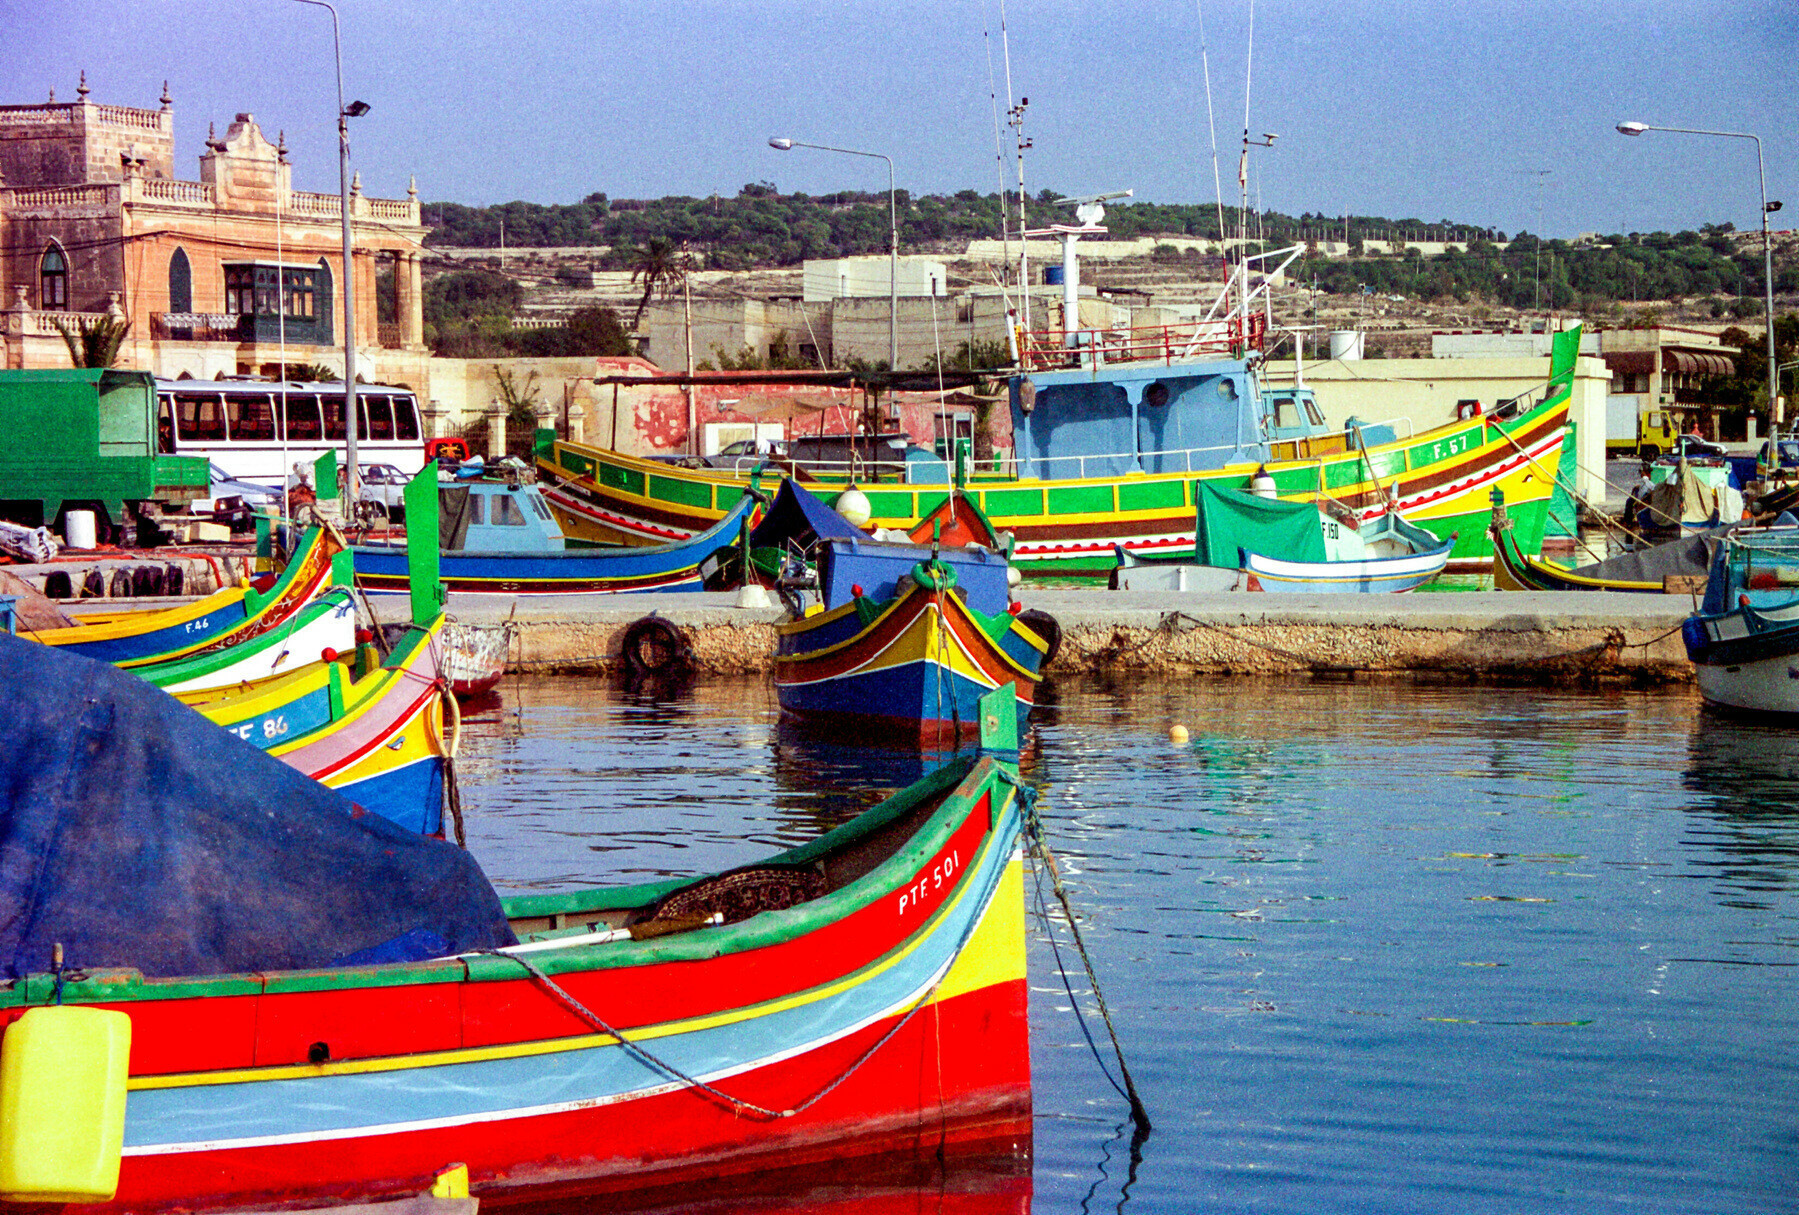 Colourful boats in a harbour in Malta.